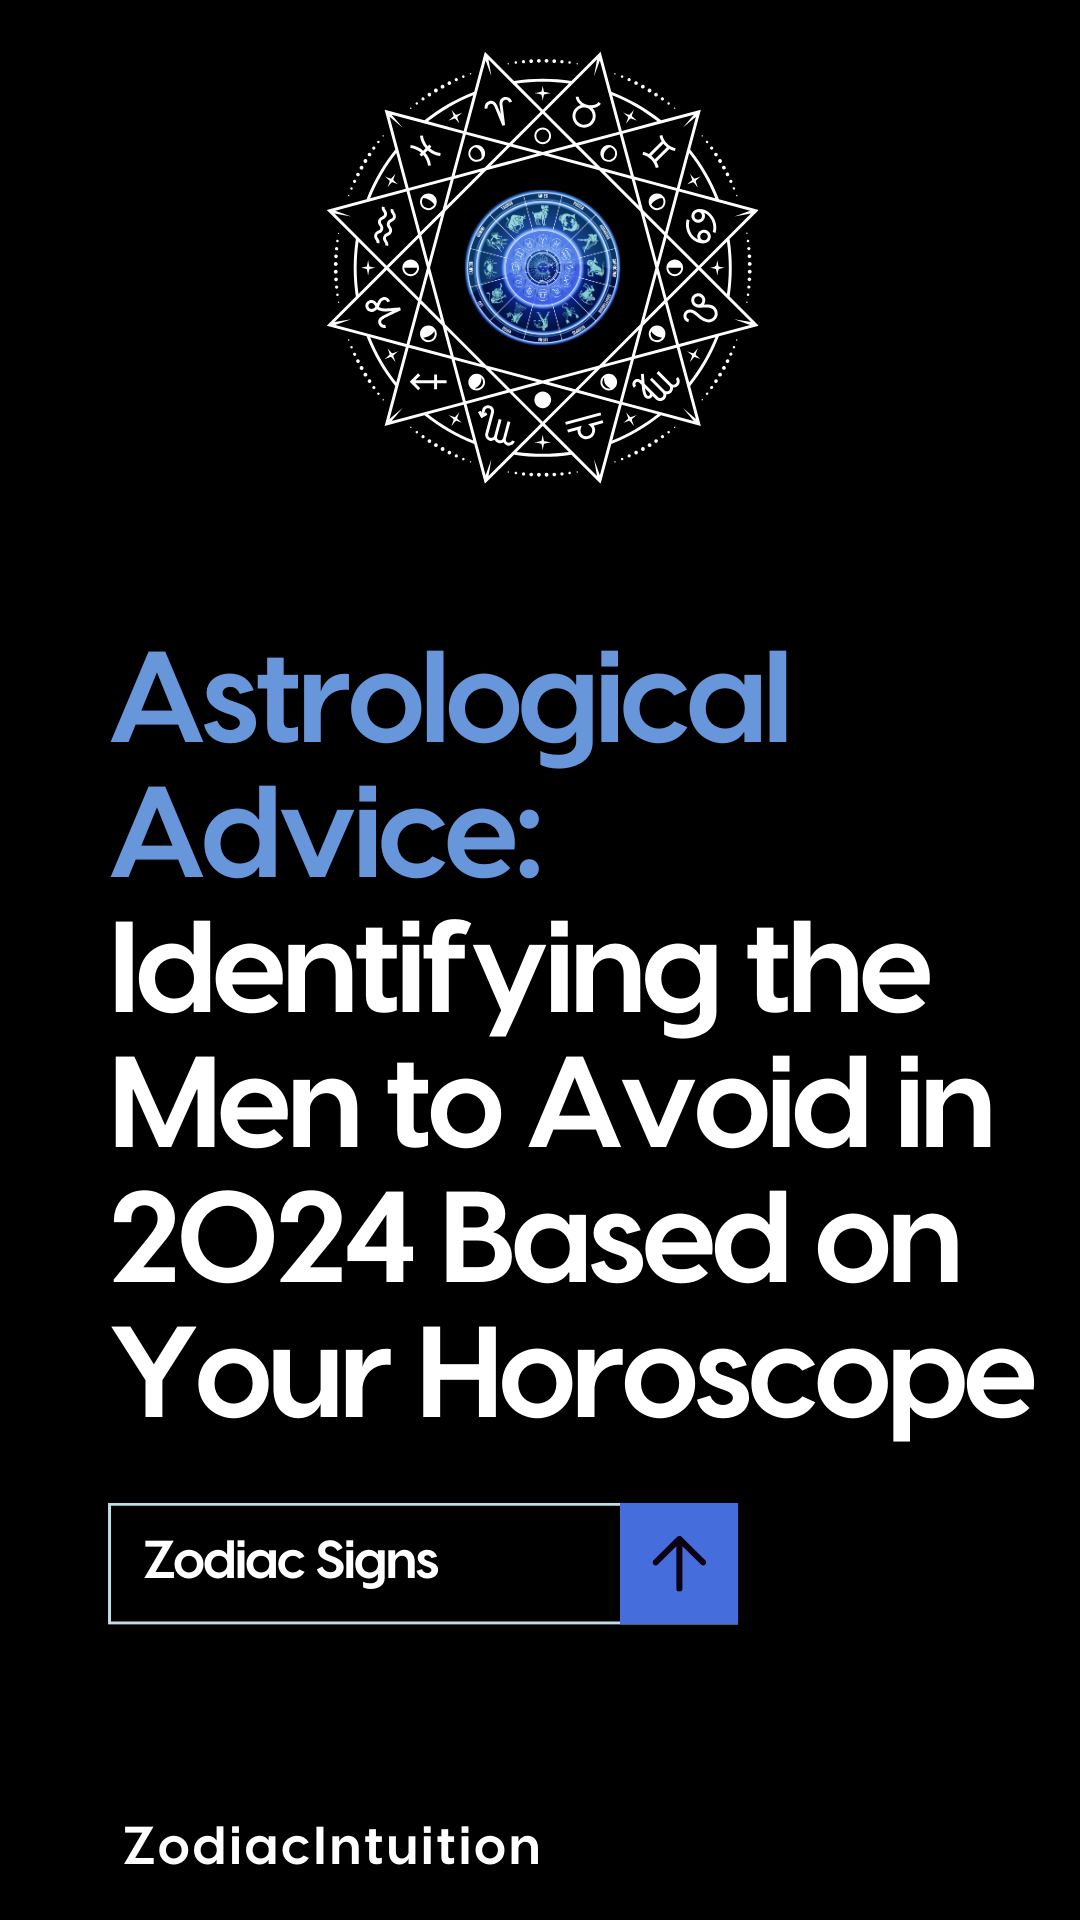 Astrological Advice: Identifying the Men to Avoid in 2024 Based on Your Horoscope